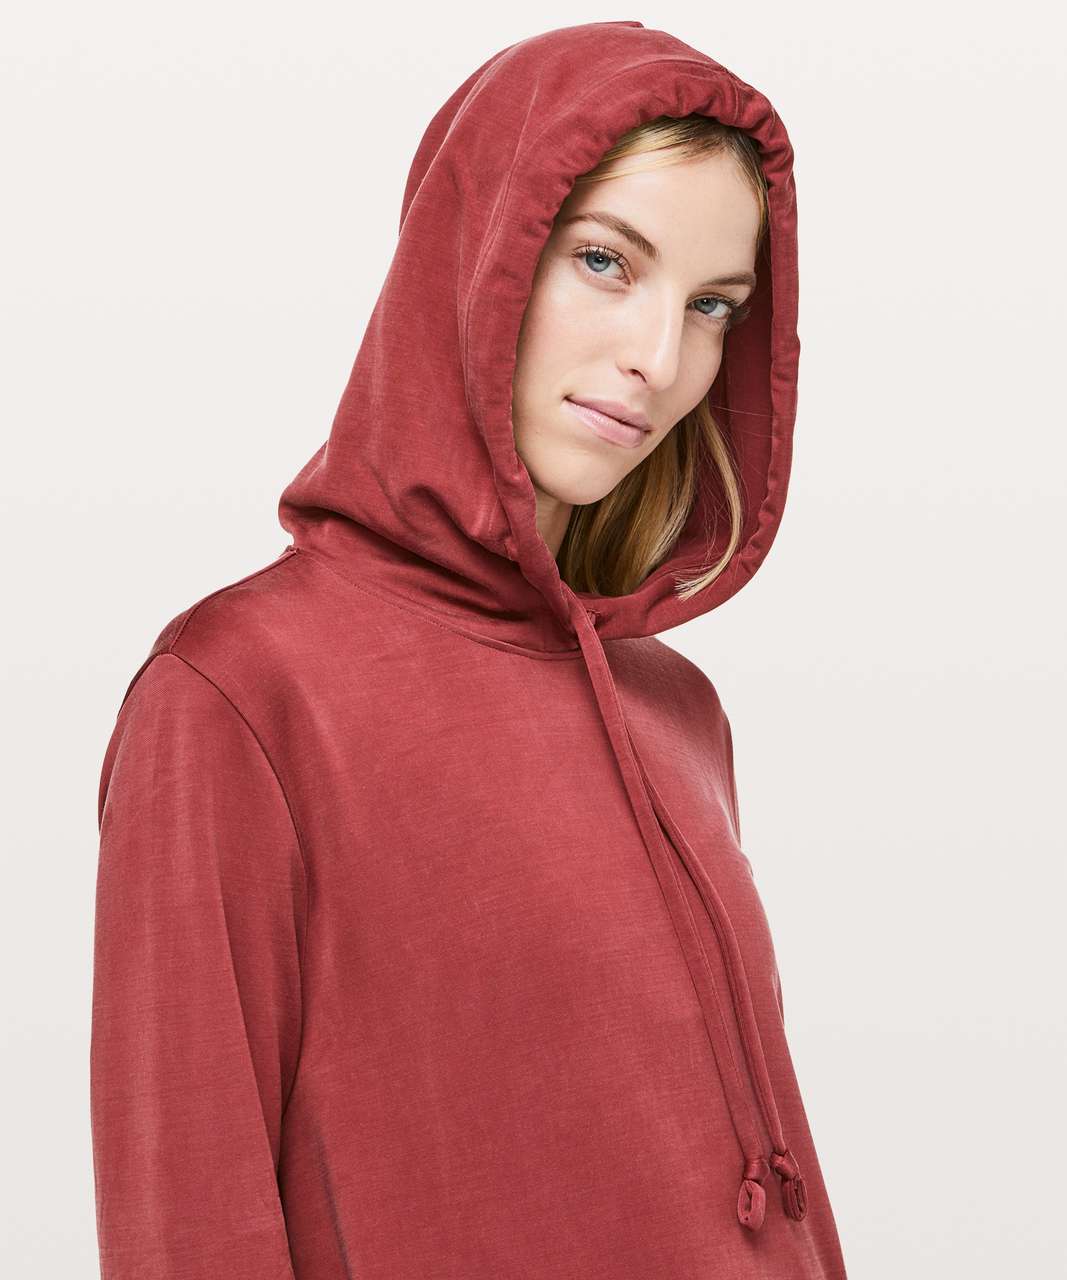 lululemon hoodie dress,Exclusive Deals and Offers,OFF 70%